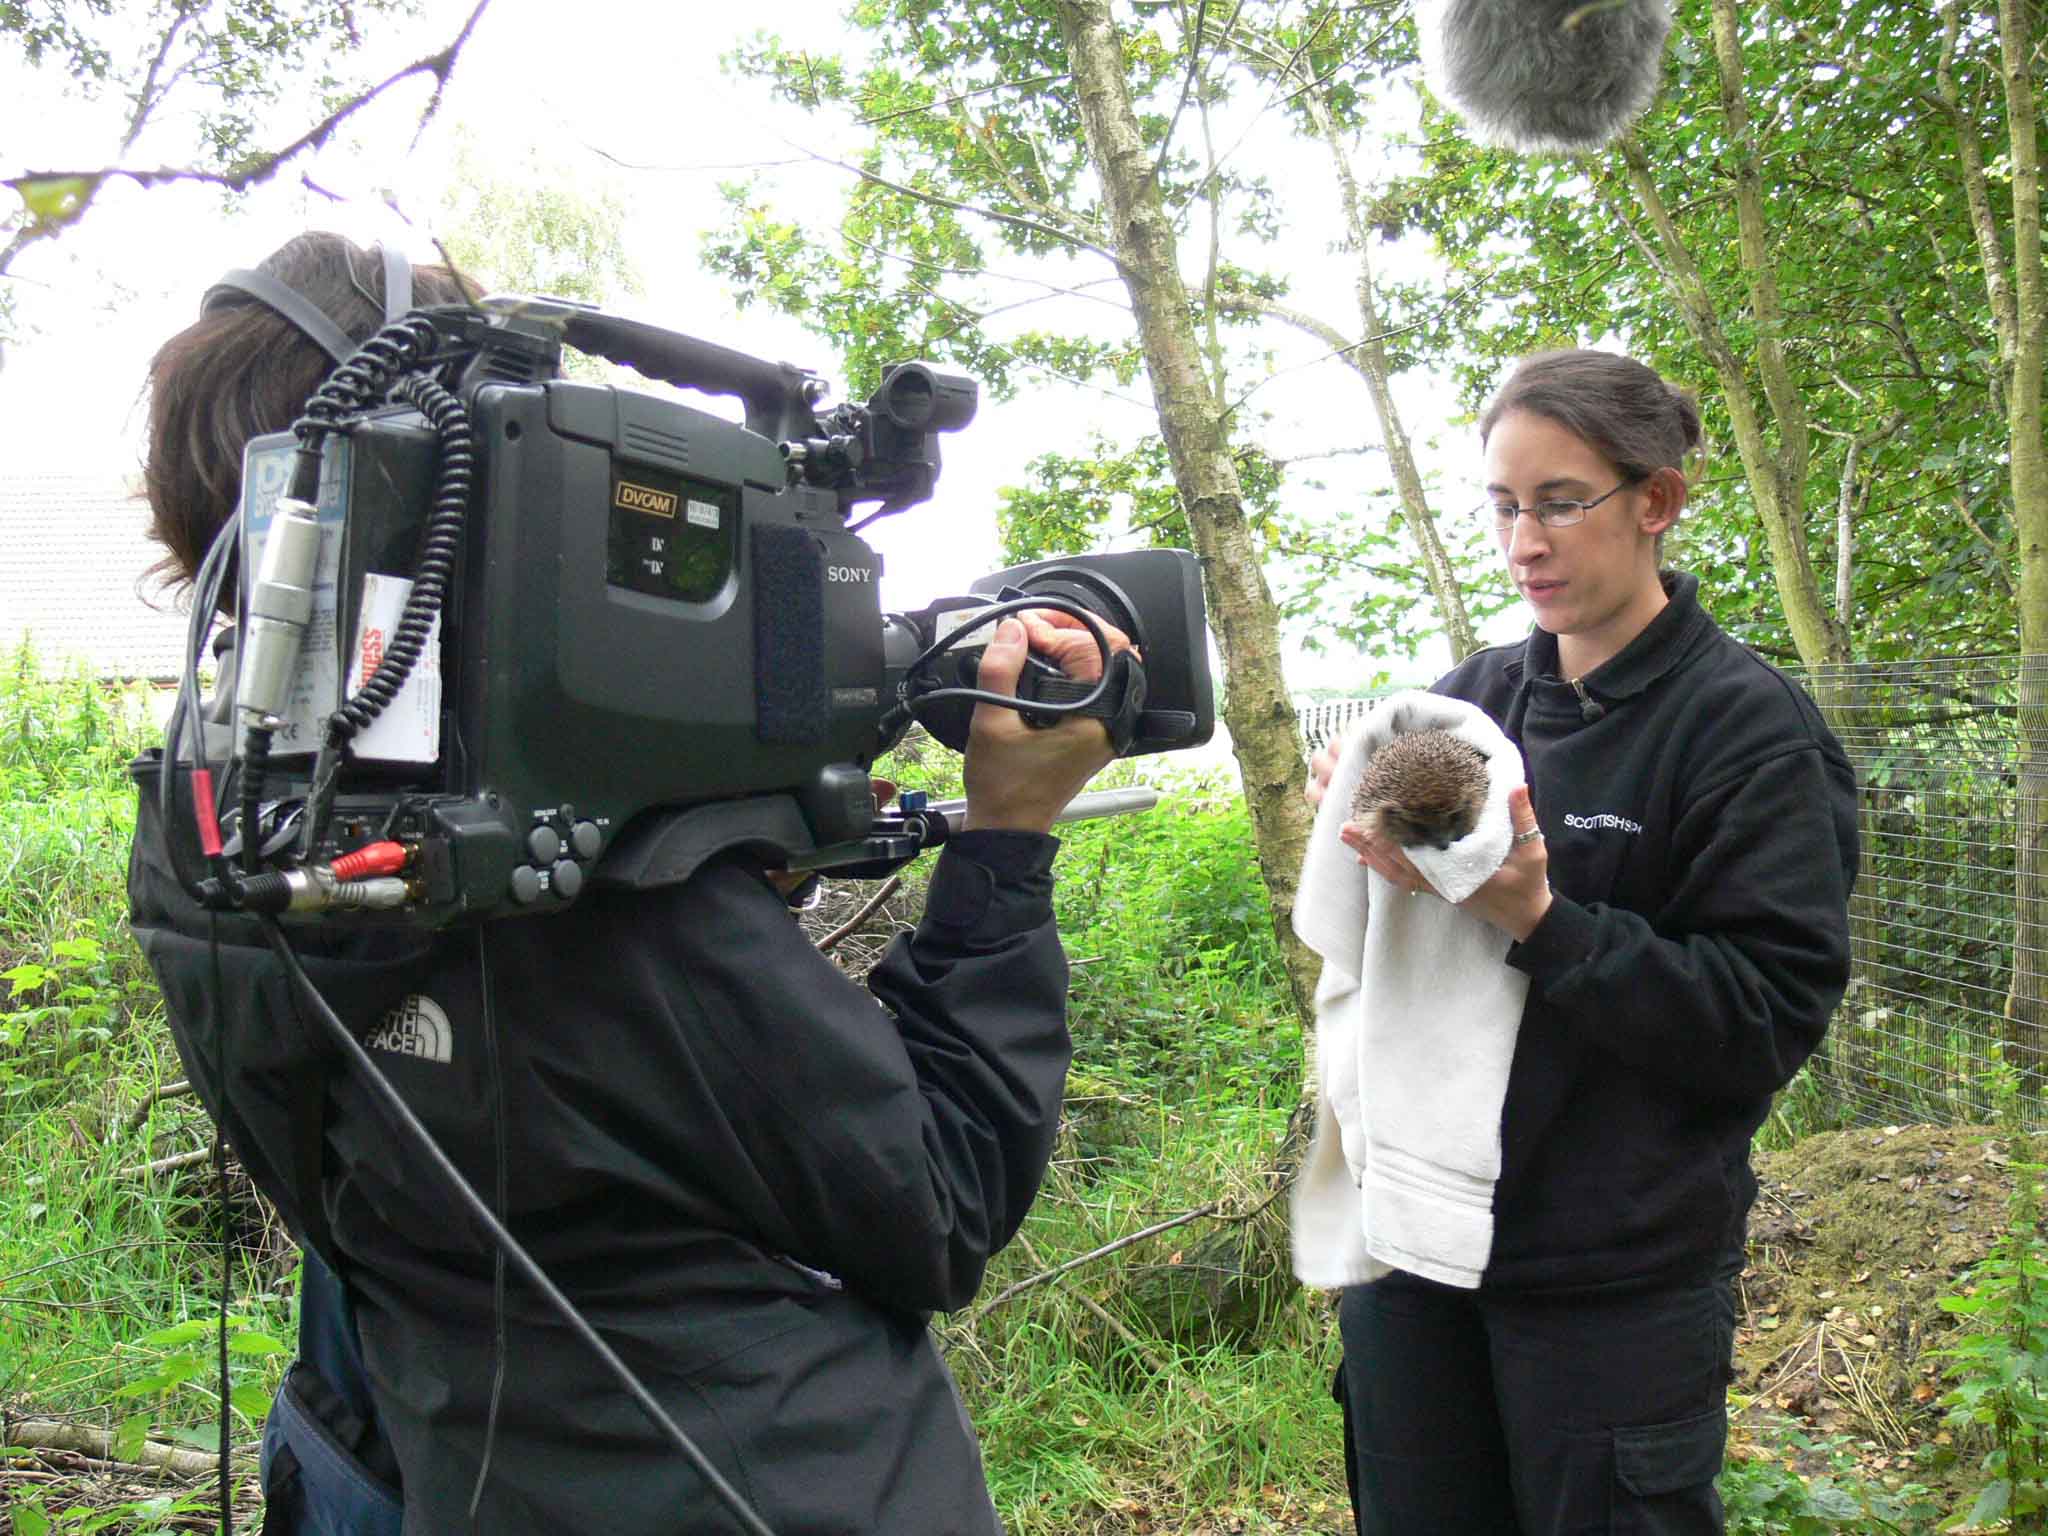 SSPCA officer Nadia with film crew and hoglet